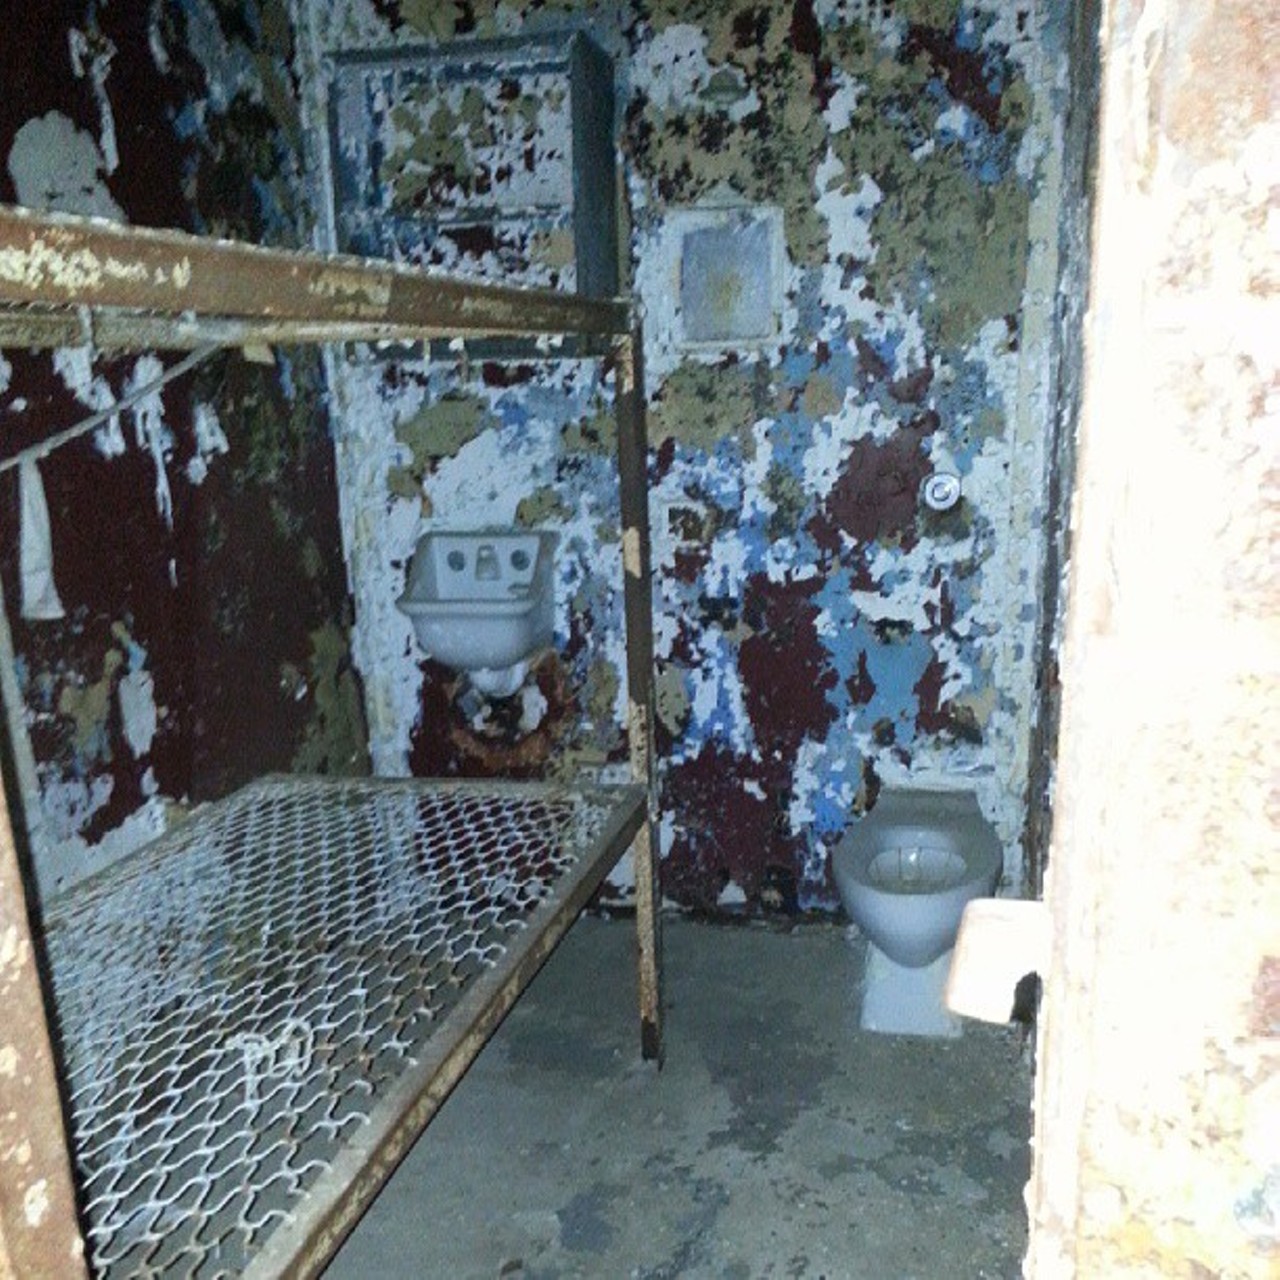 27 Awesomely Eerie Photos of the Mansfield Reformatory